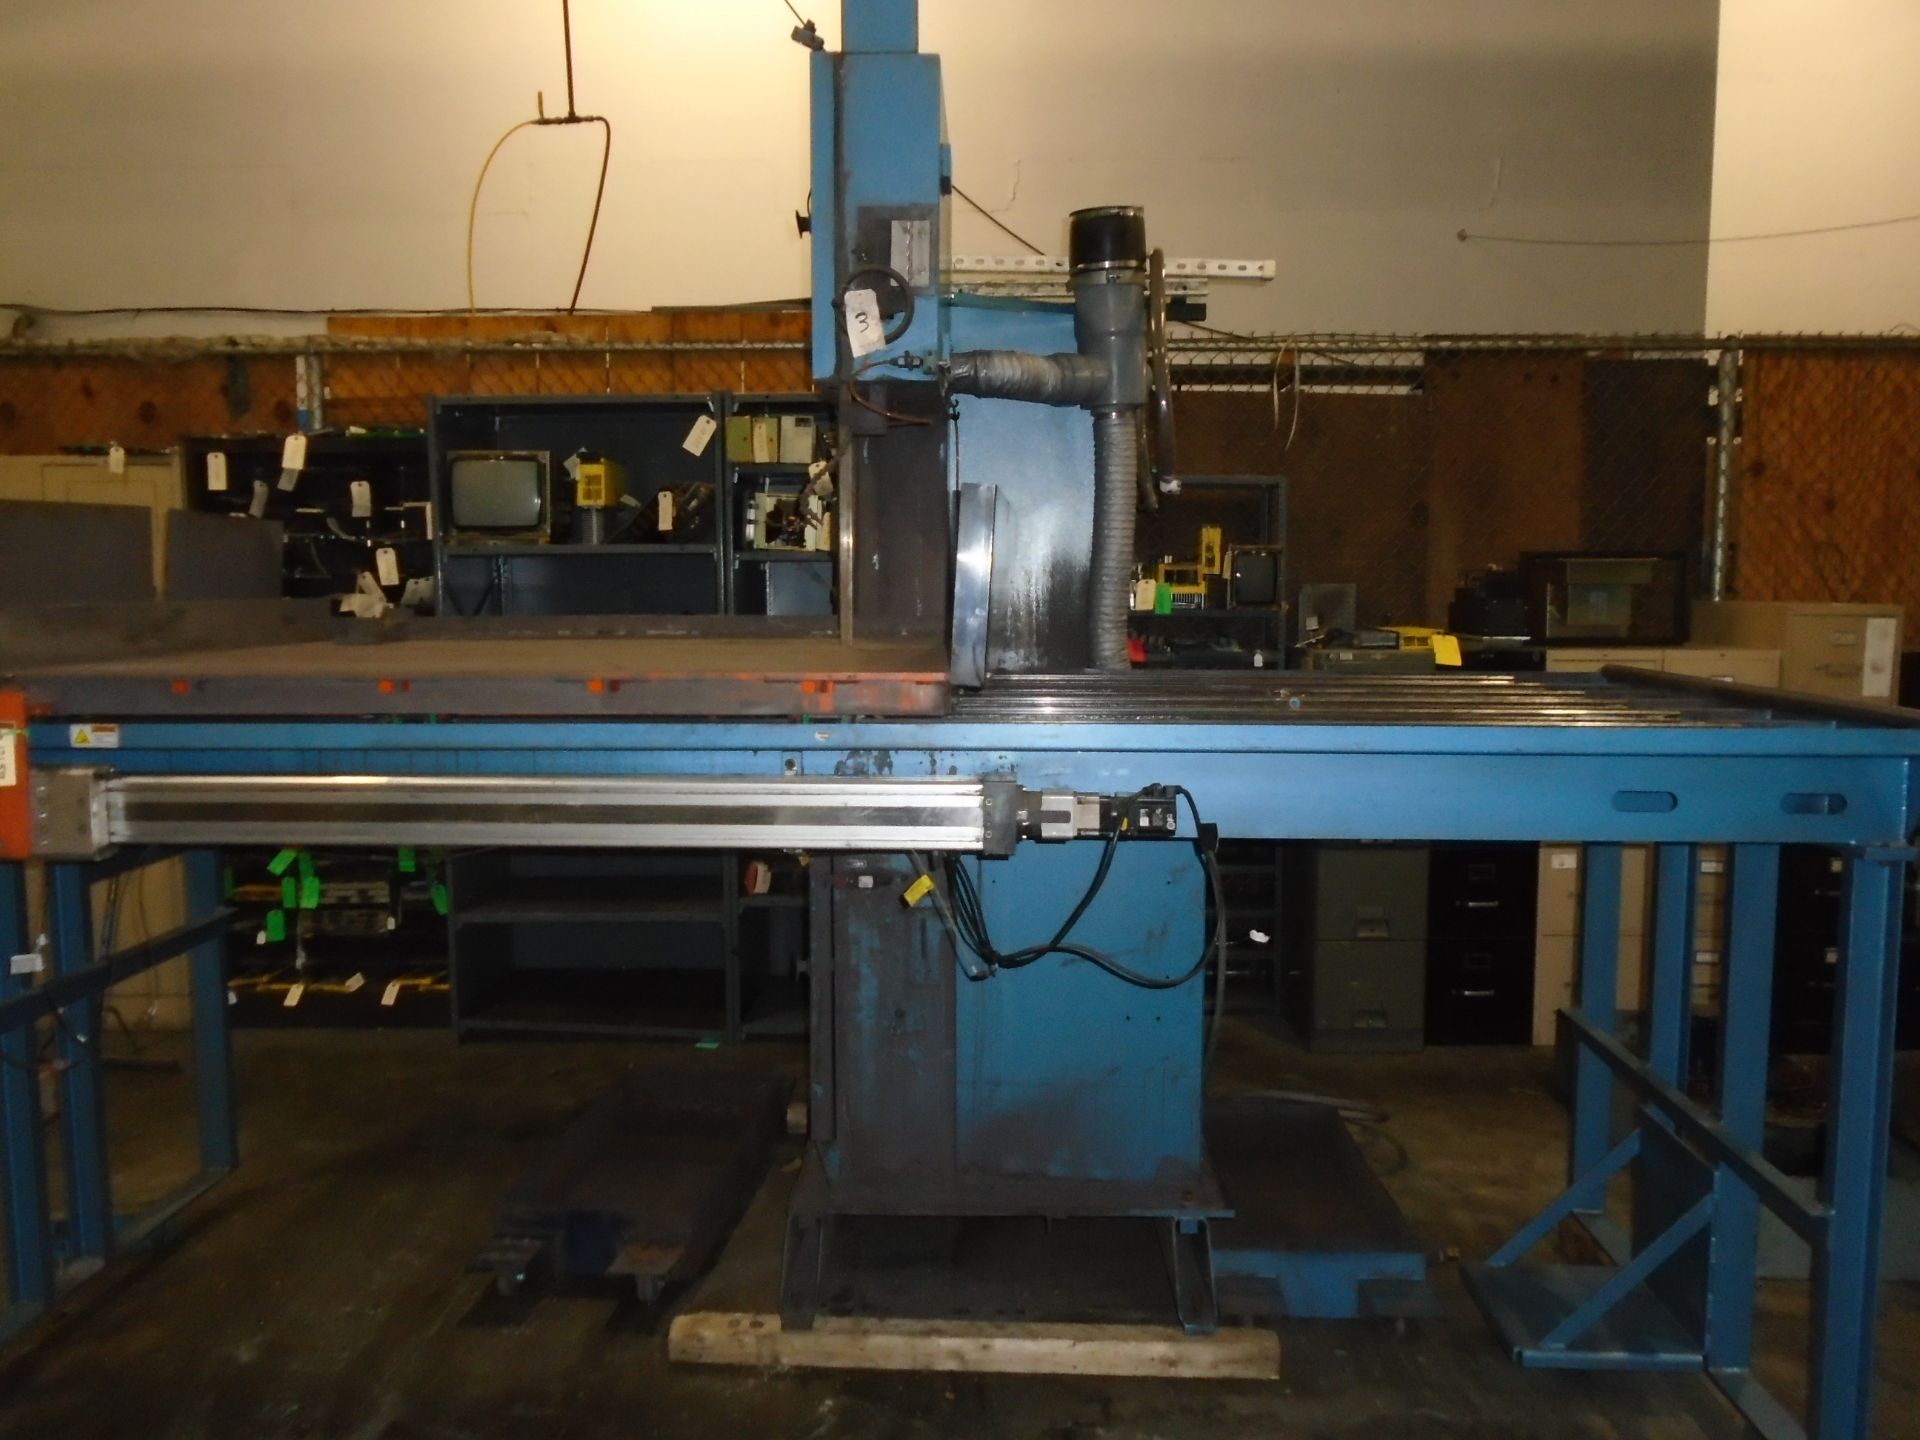 DoAll 2018-DW60 CNC Vertical Plate Saw Fanuc Control New 2009 SN: 504-09104 Capacity: 60” x 20" x